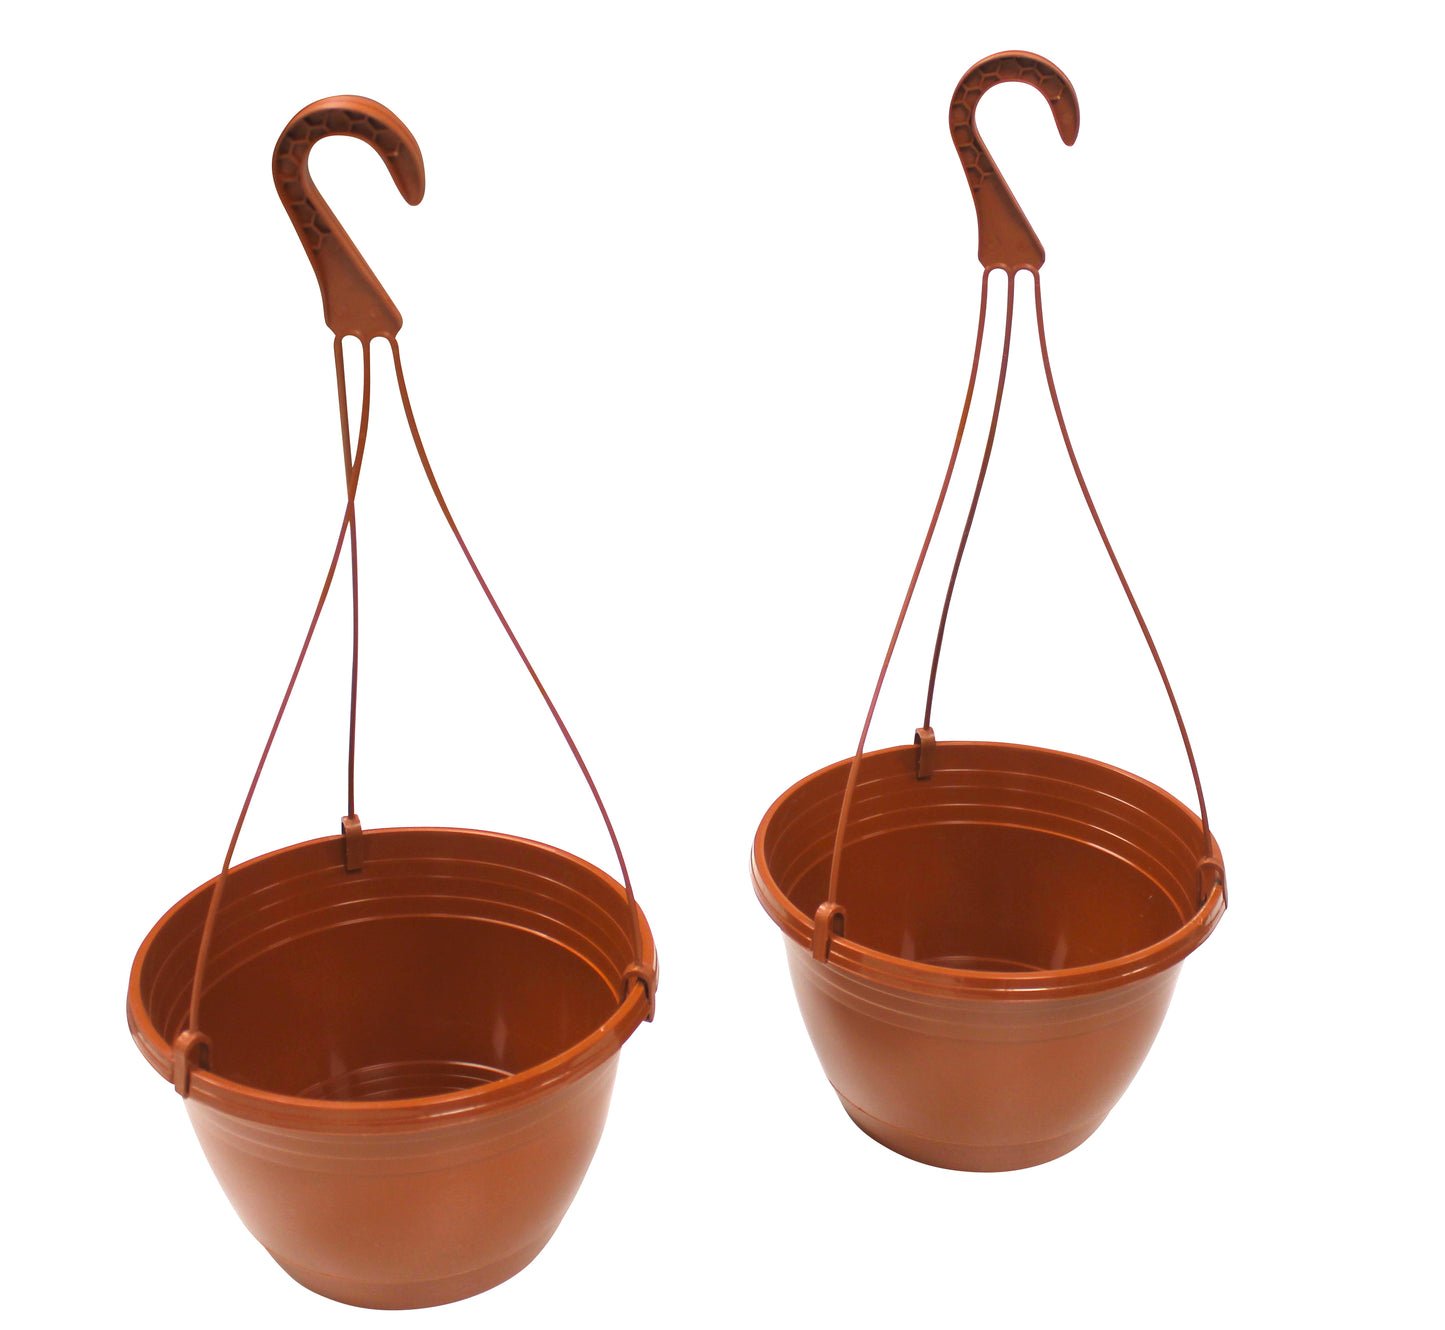 Set of 2 hanging baskets, Green or Terracotta. Made From Recycled Plastics